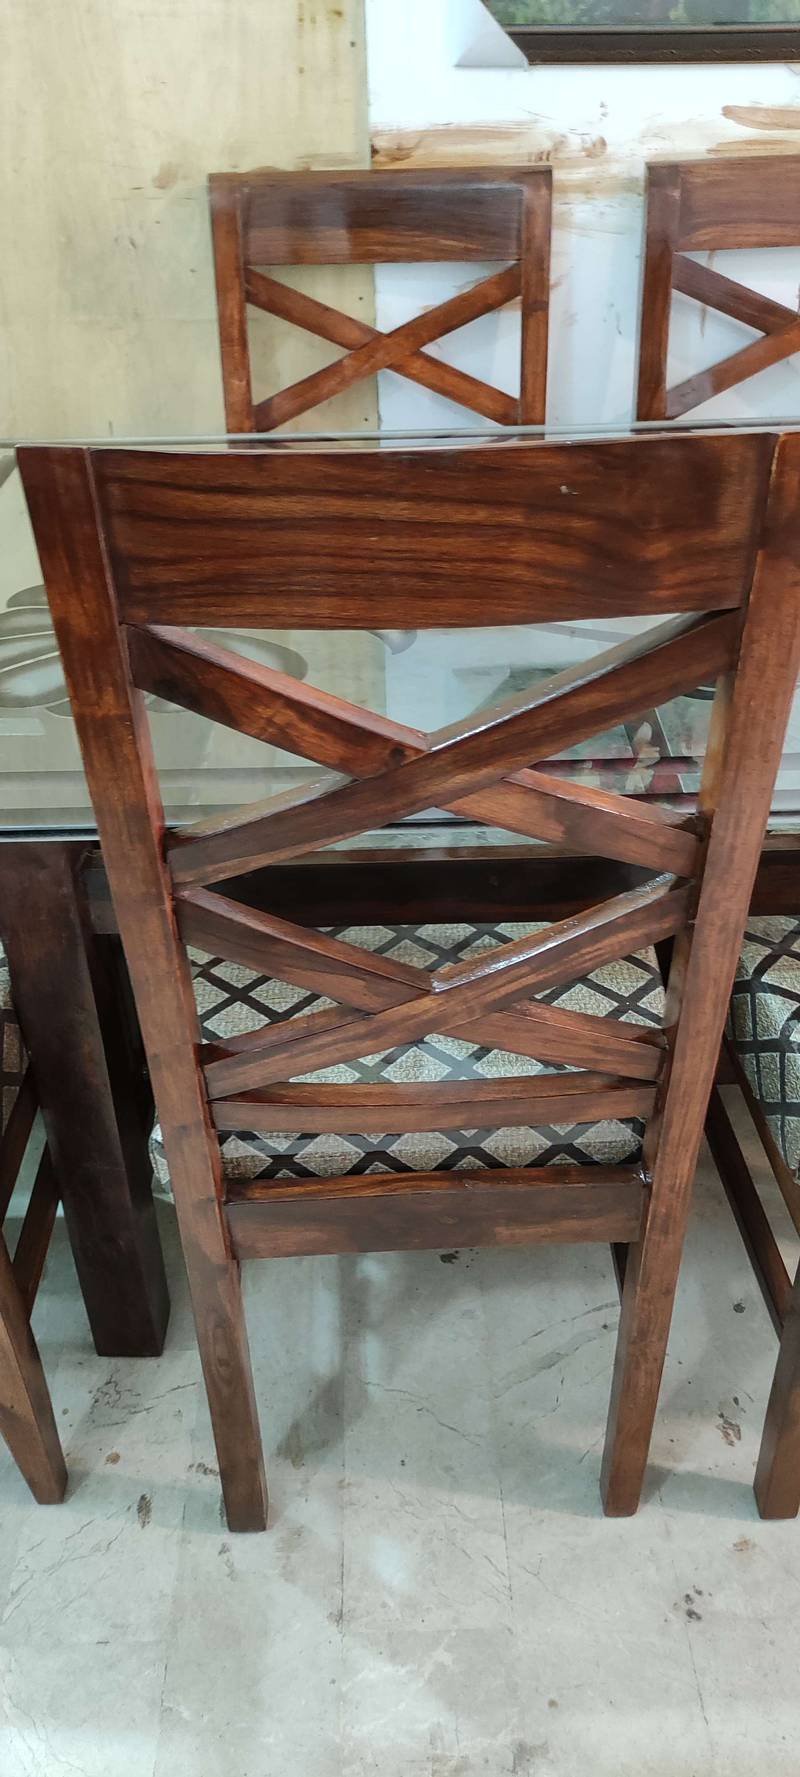 6 CHAIR DINING TABLE SHISHAM WOODEN (NEW) NOT USE. 6